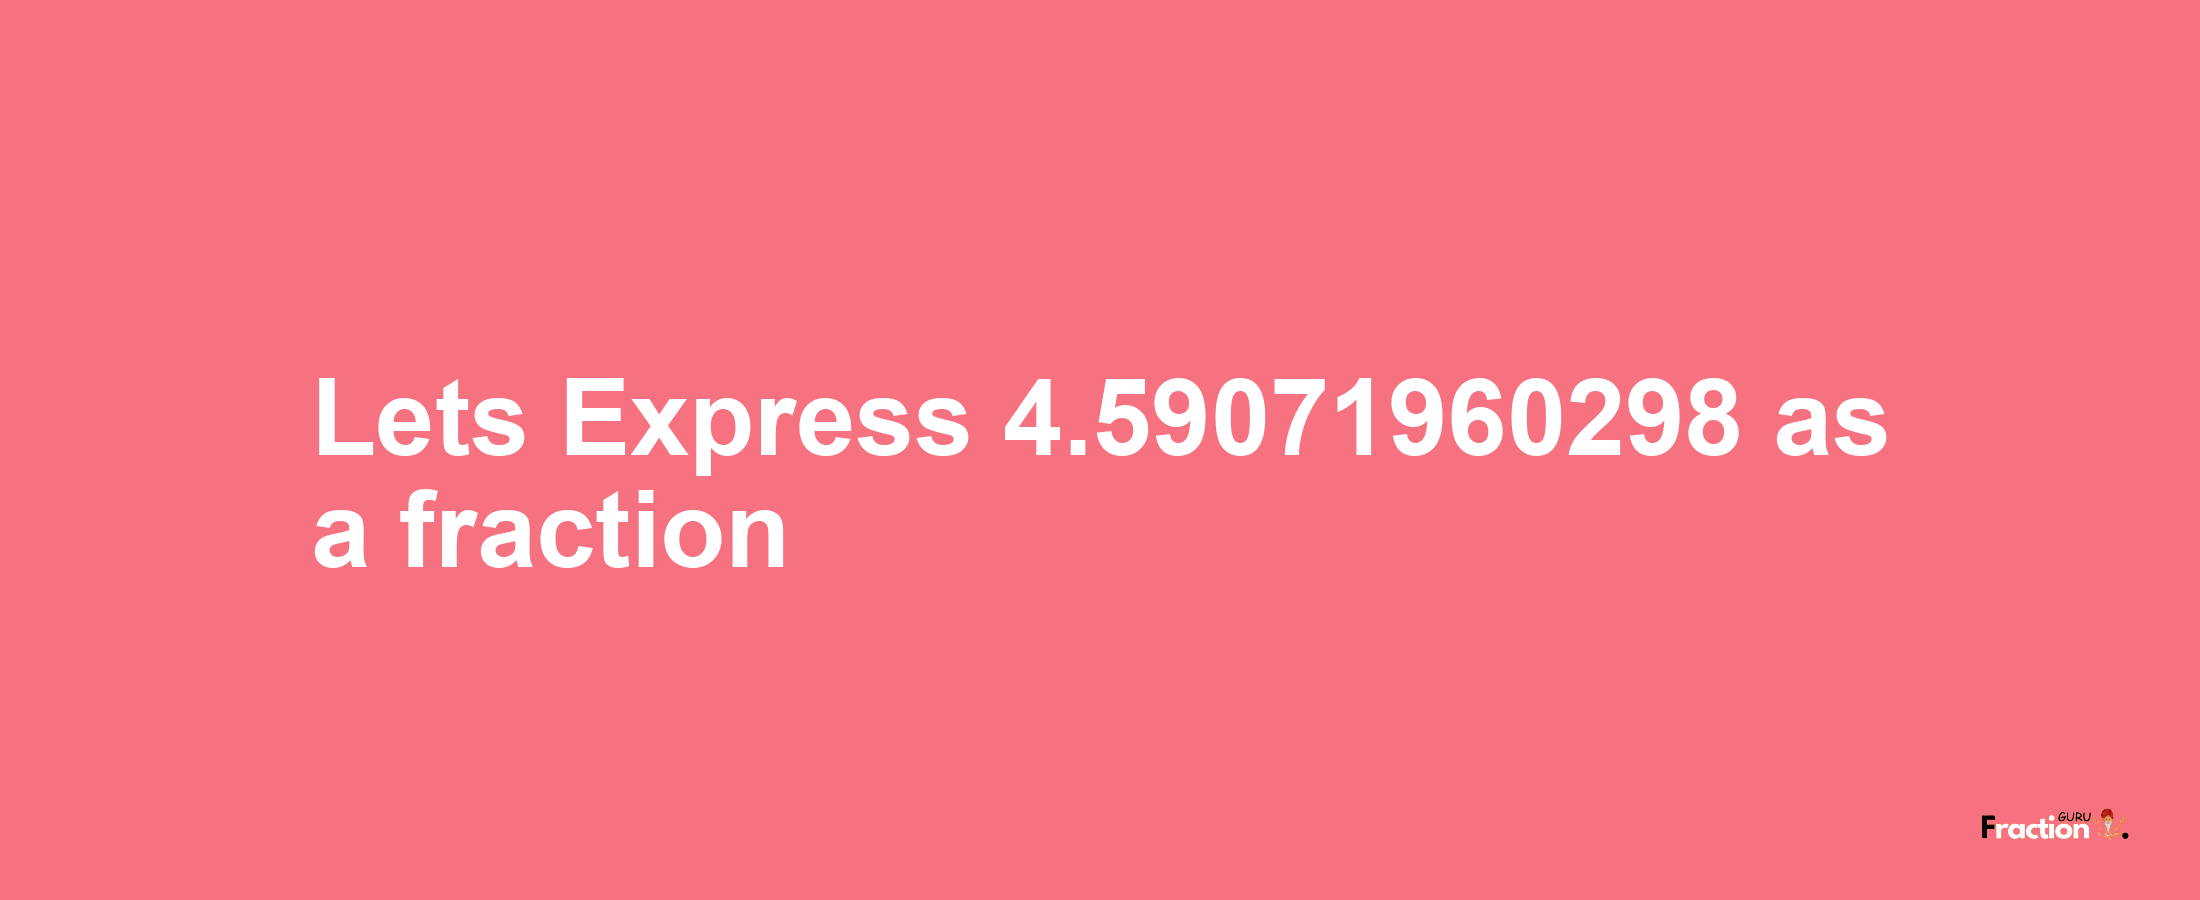 Lets Express 4.59071960298 as afraction